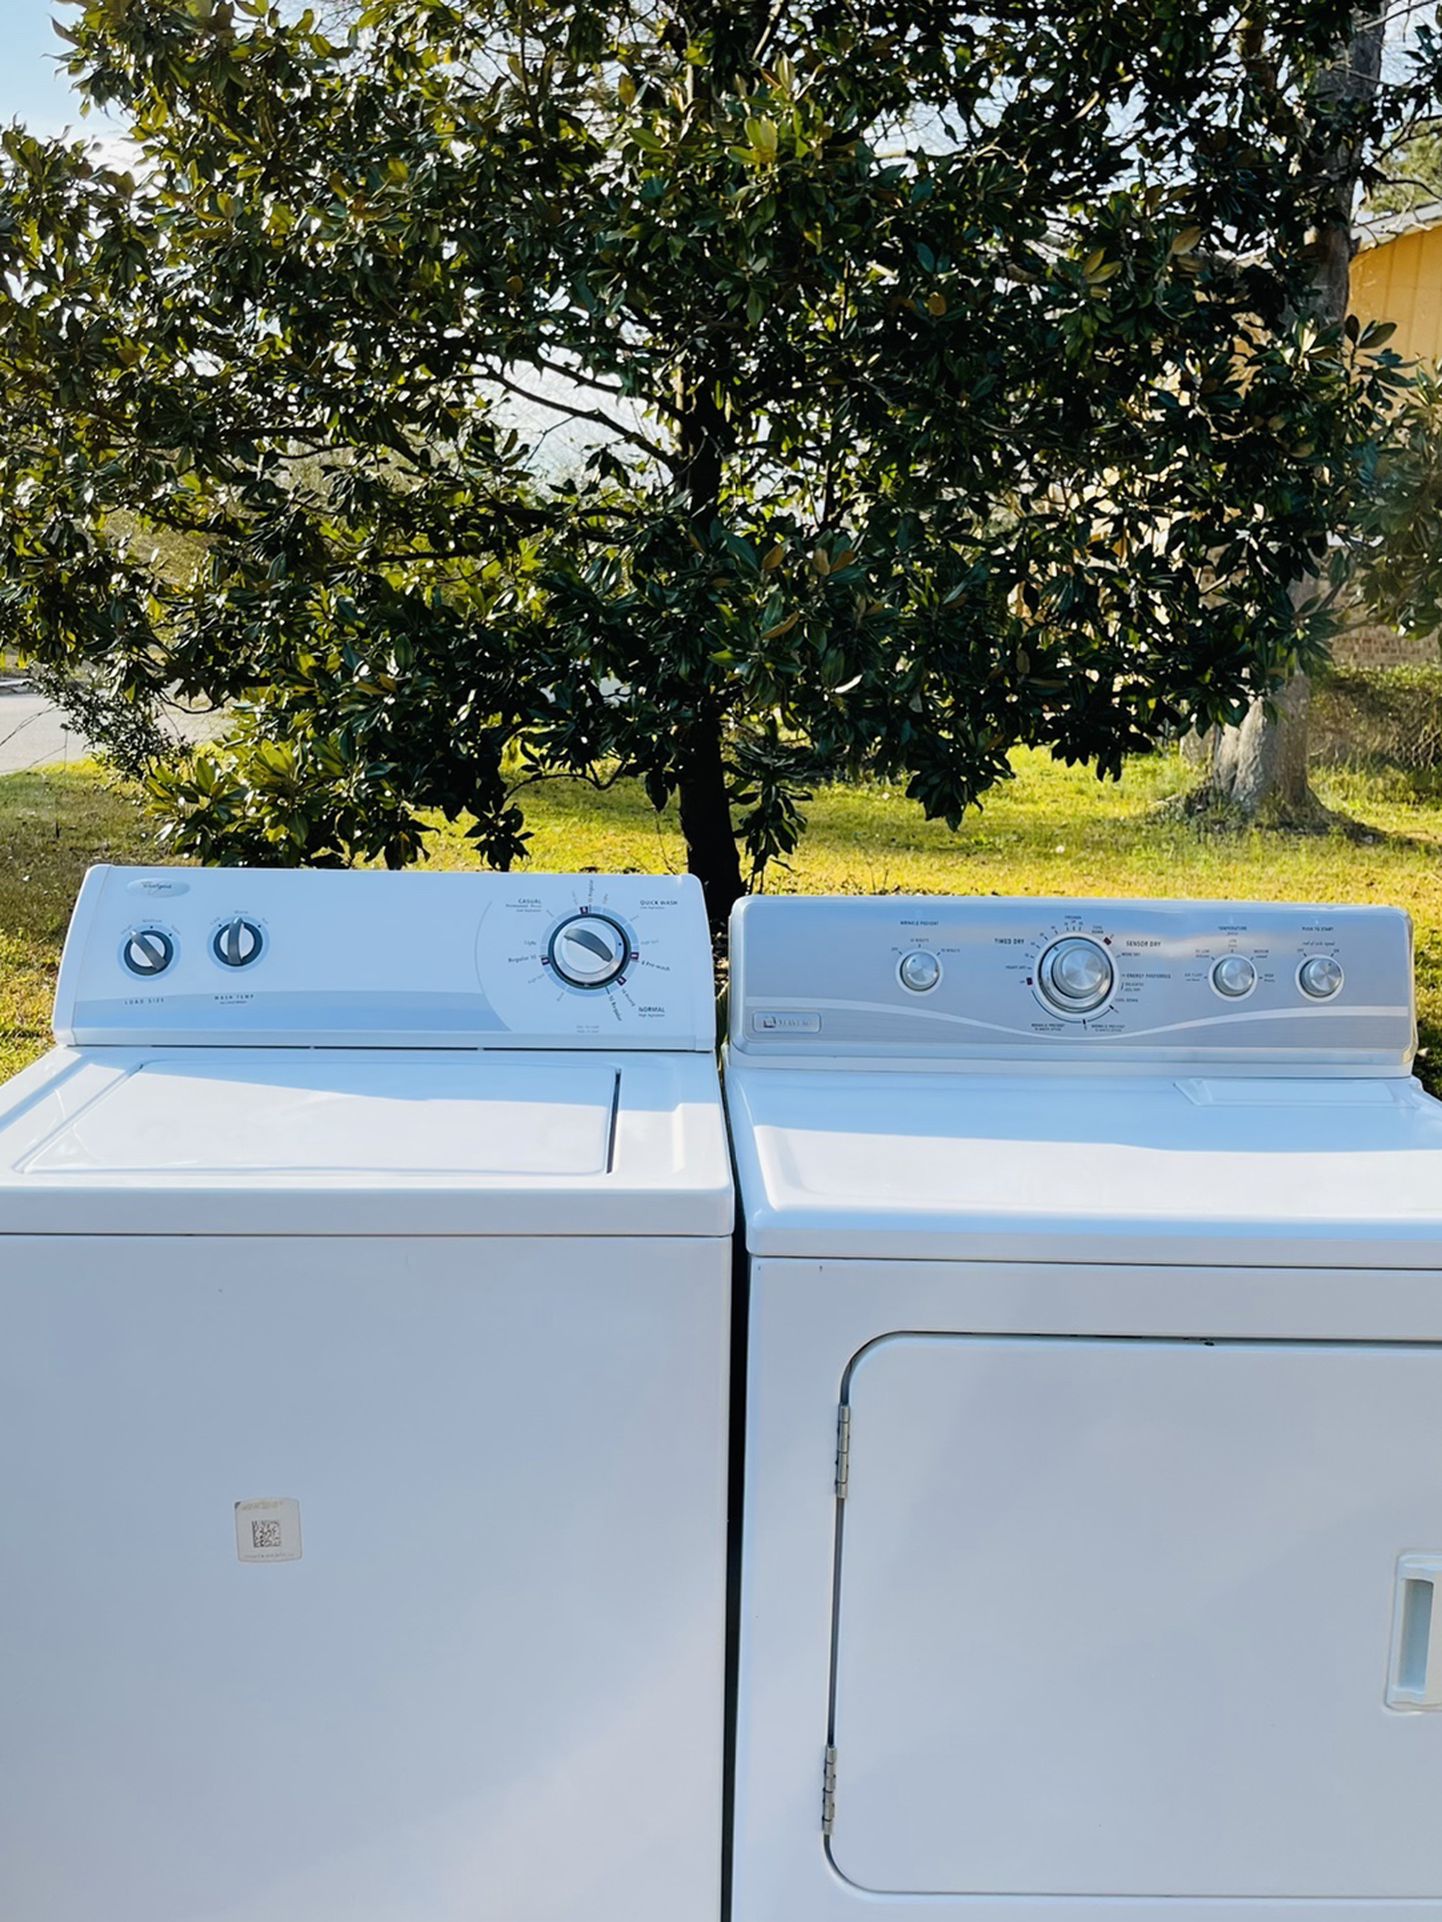 Whirlpool Washer and Maytag Dryer Set Available